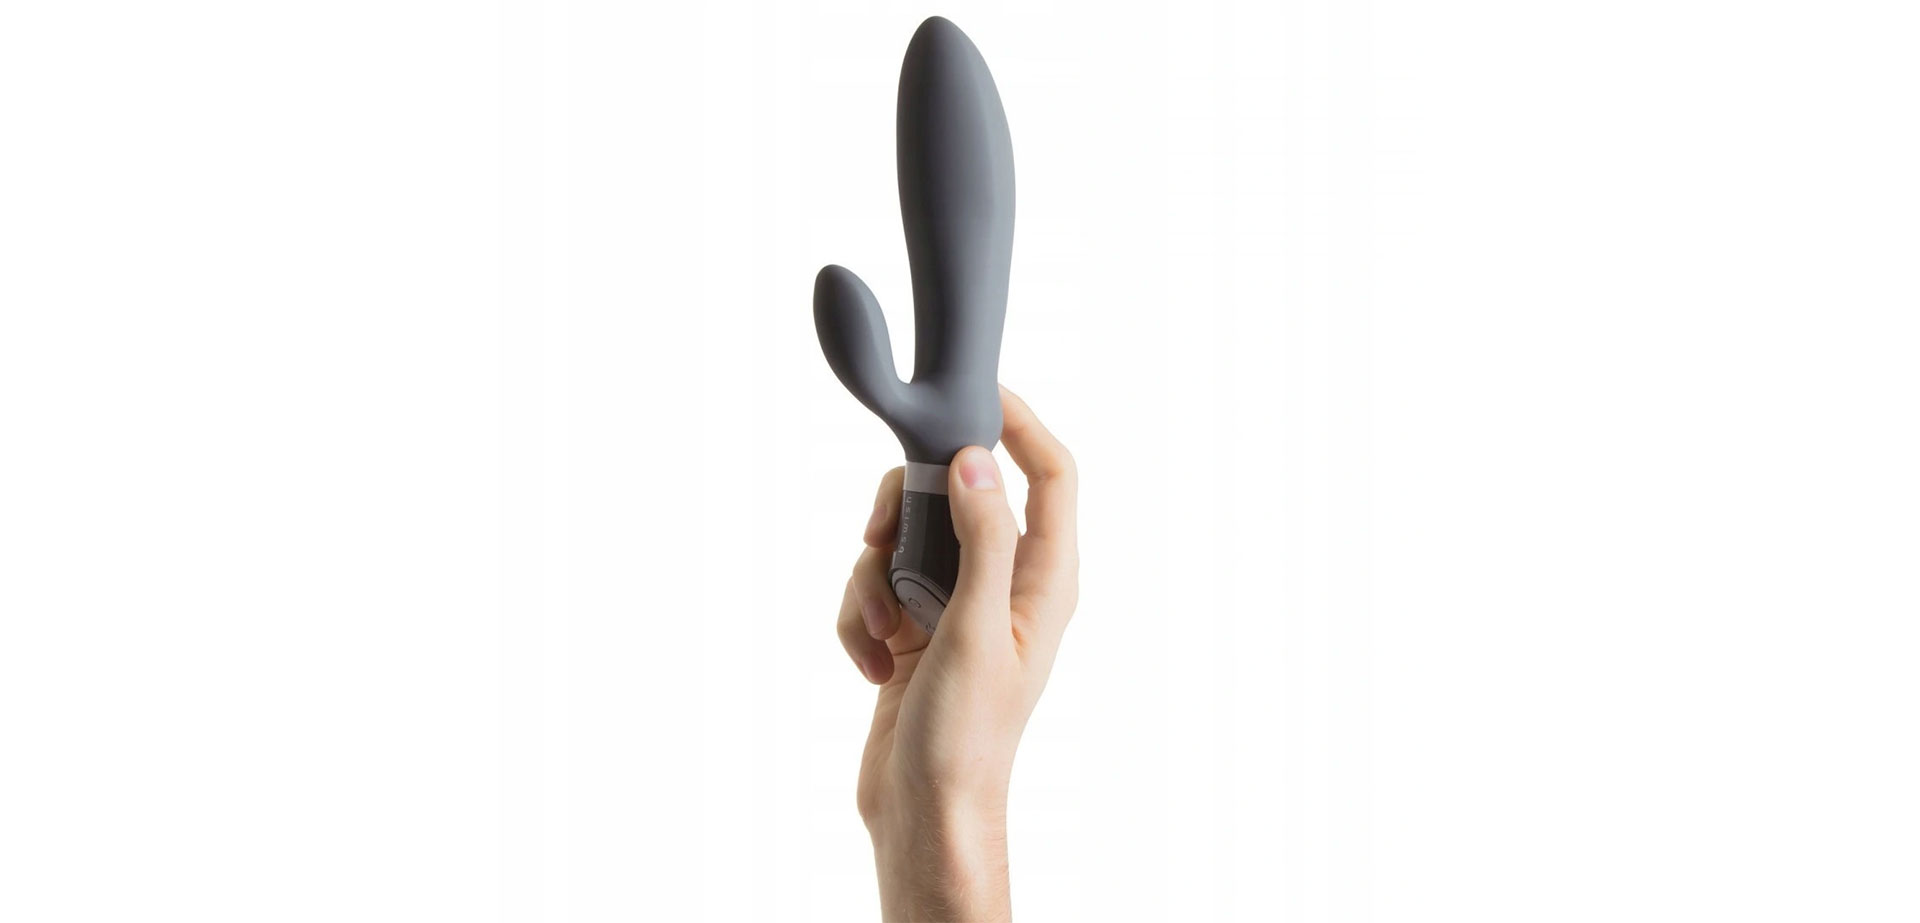 B Prostate massager filled with Swish.